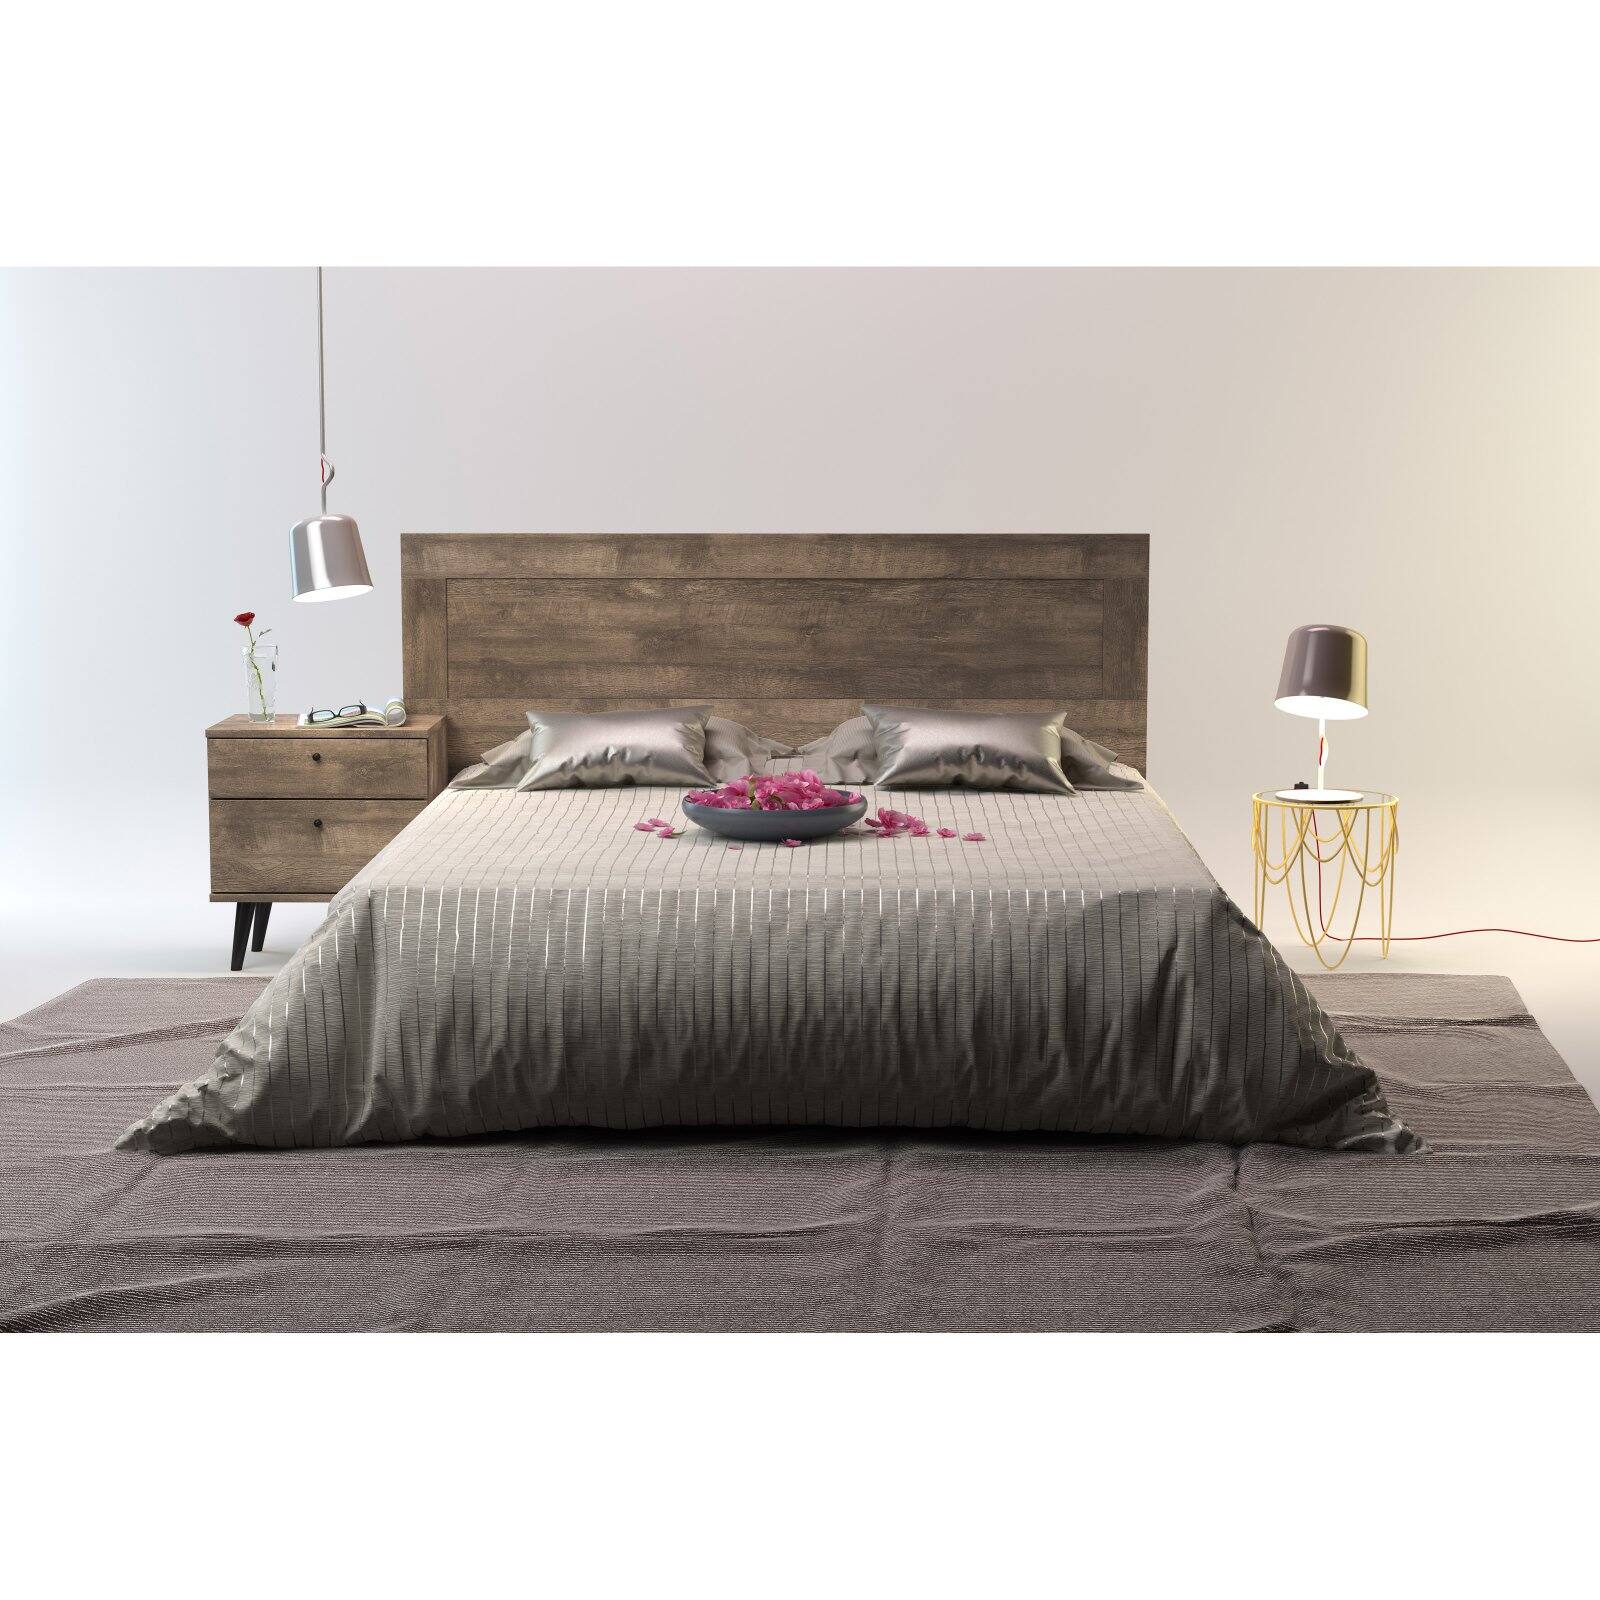 Midtown Concept Kansas Mid-Century Platform Bed with Headboard - image 2 of 11